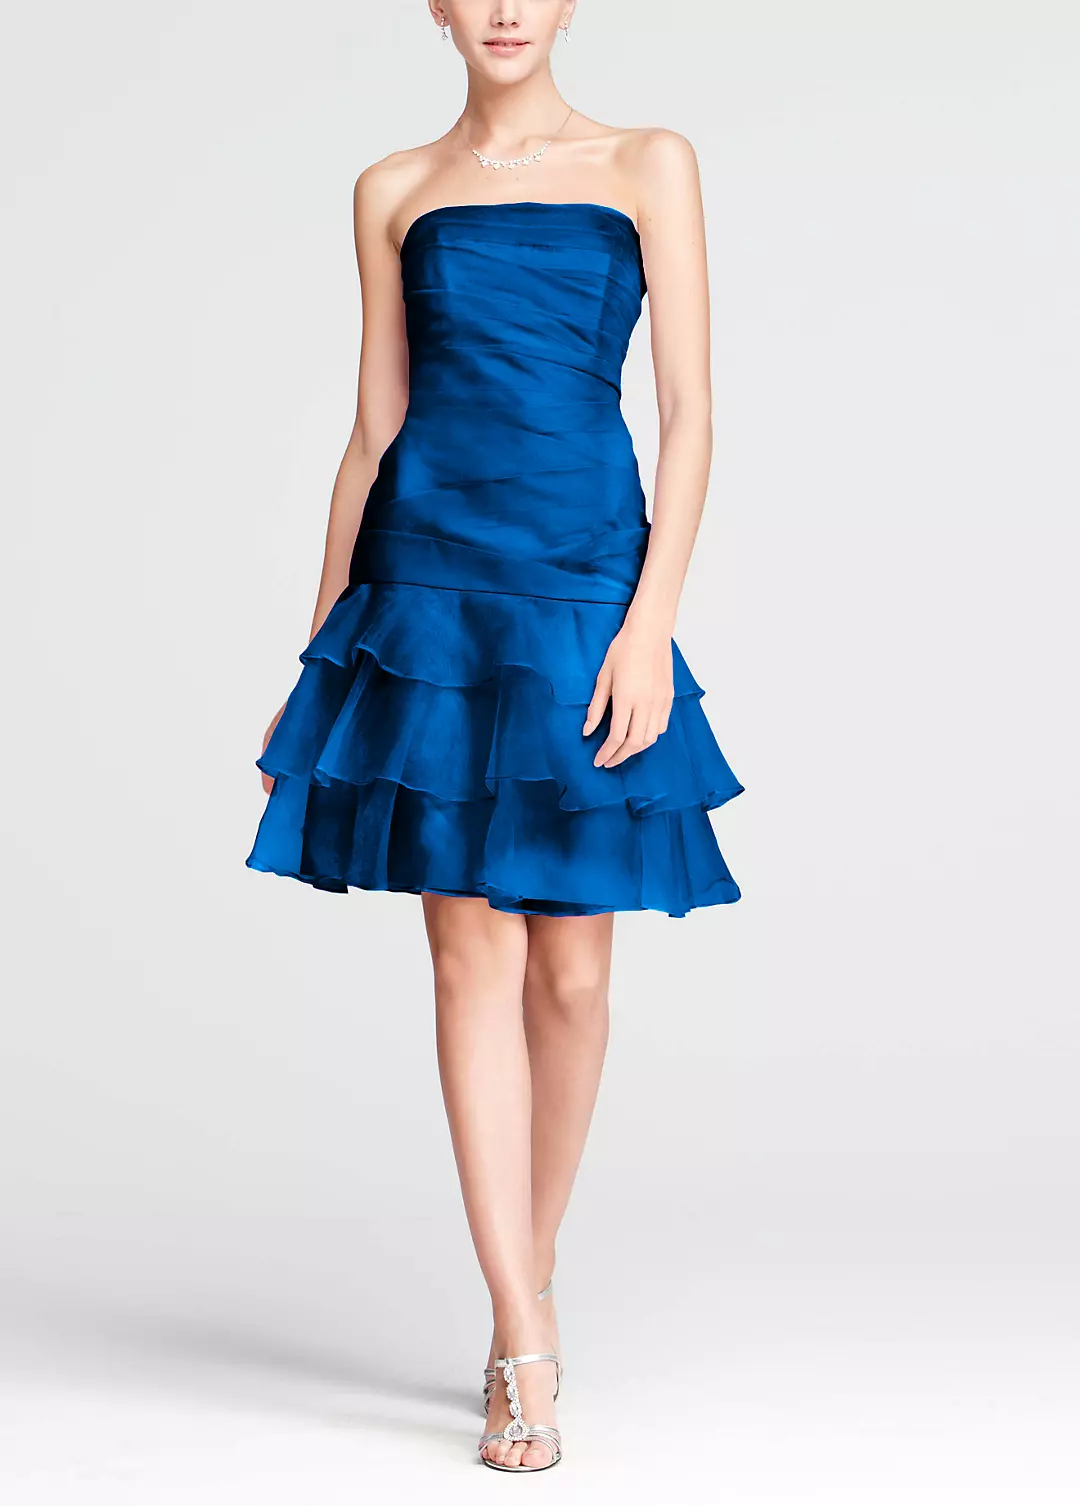 Strapless Dress with Drop Waist and Tiered Skirt Image